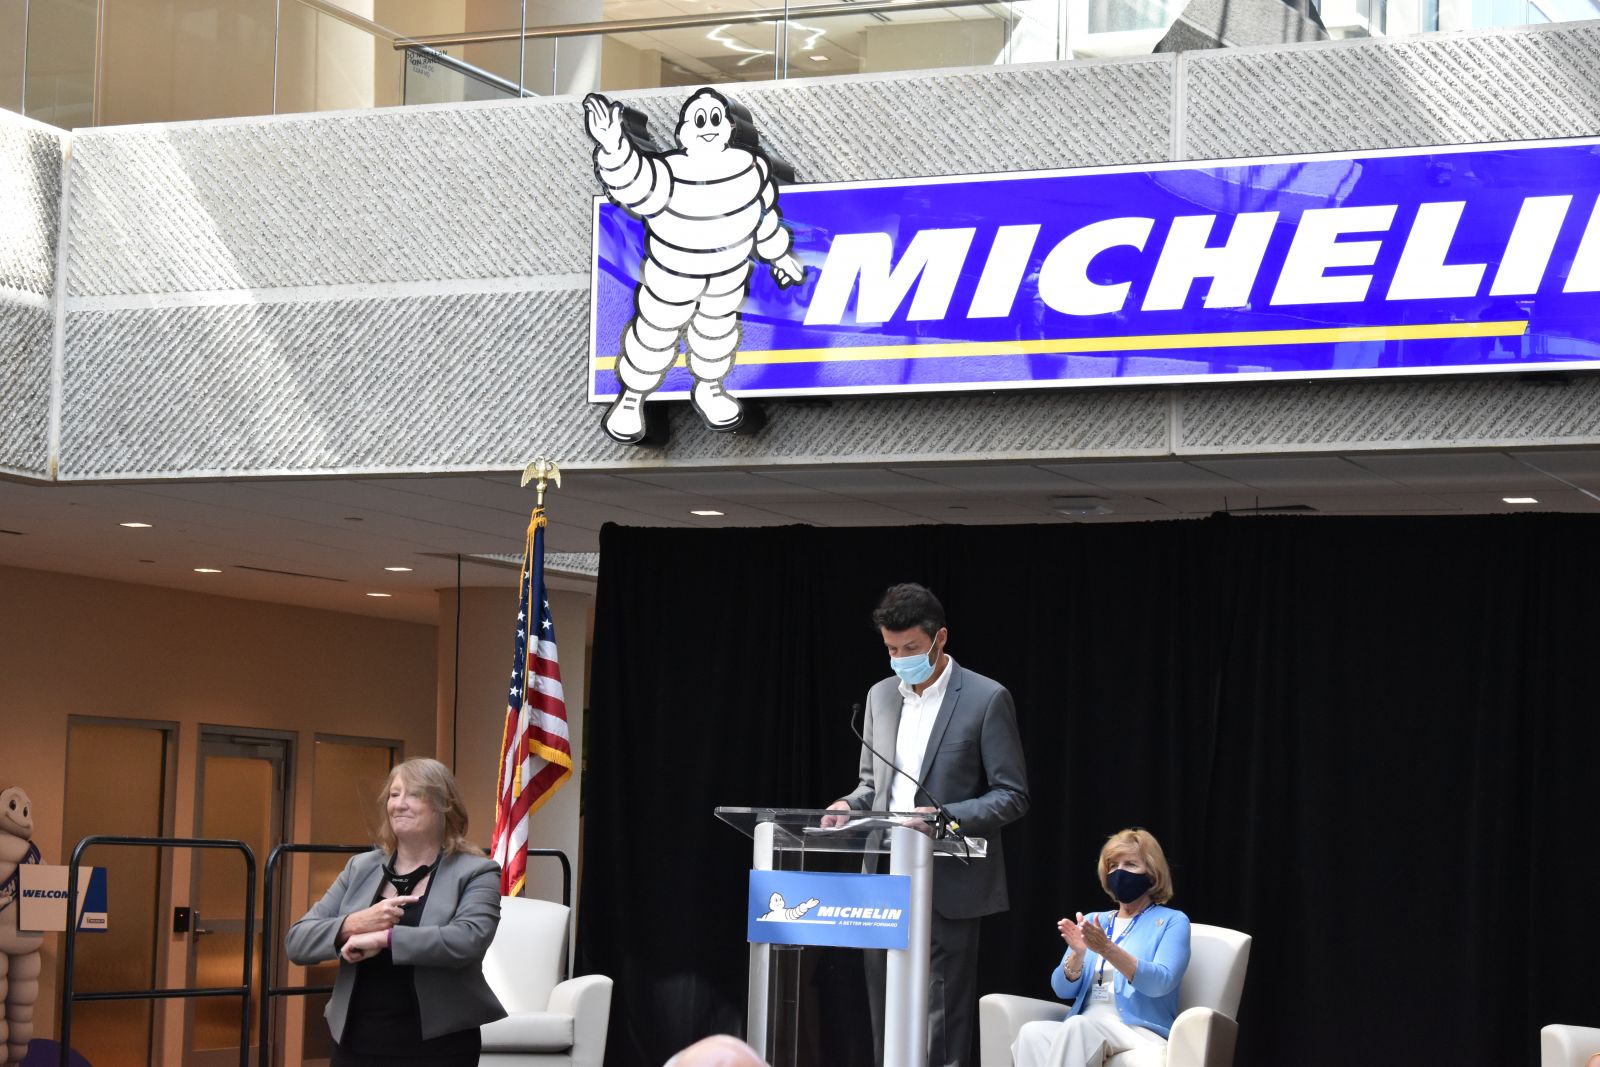 Michelin President Alexis Garcin announces the tiremaker's donation of 50,000 masks following a speech by S.C. Superintendent of Education Molly Spearman. (Photo/Molly Hulsey)